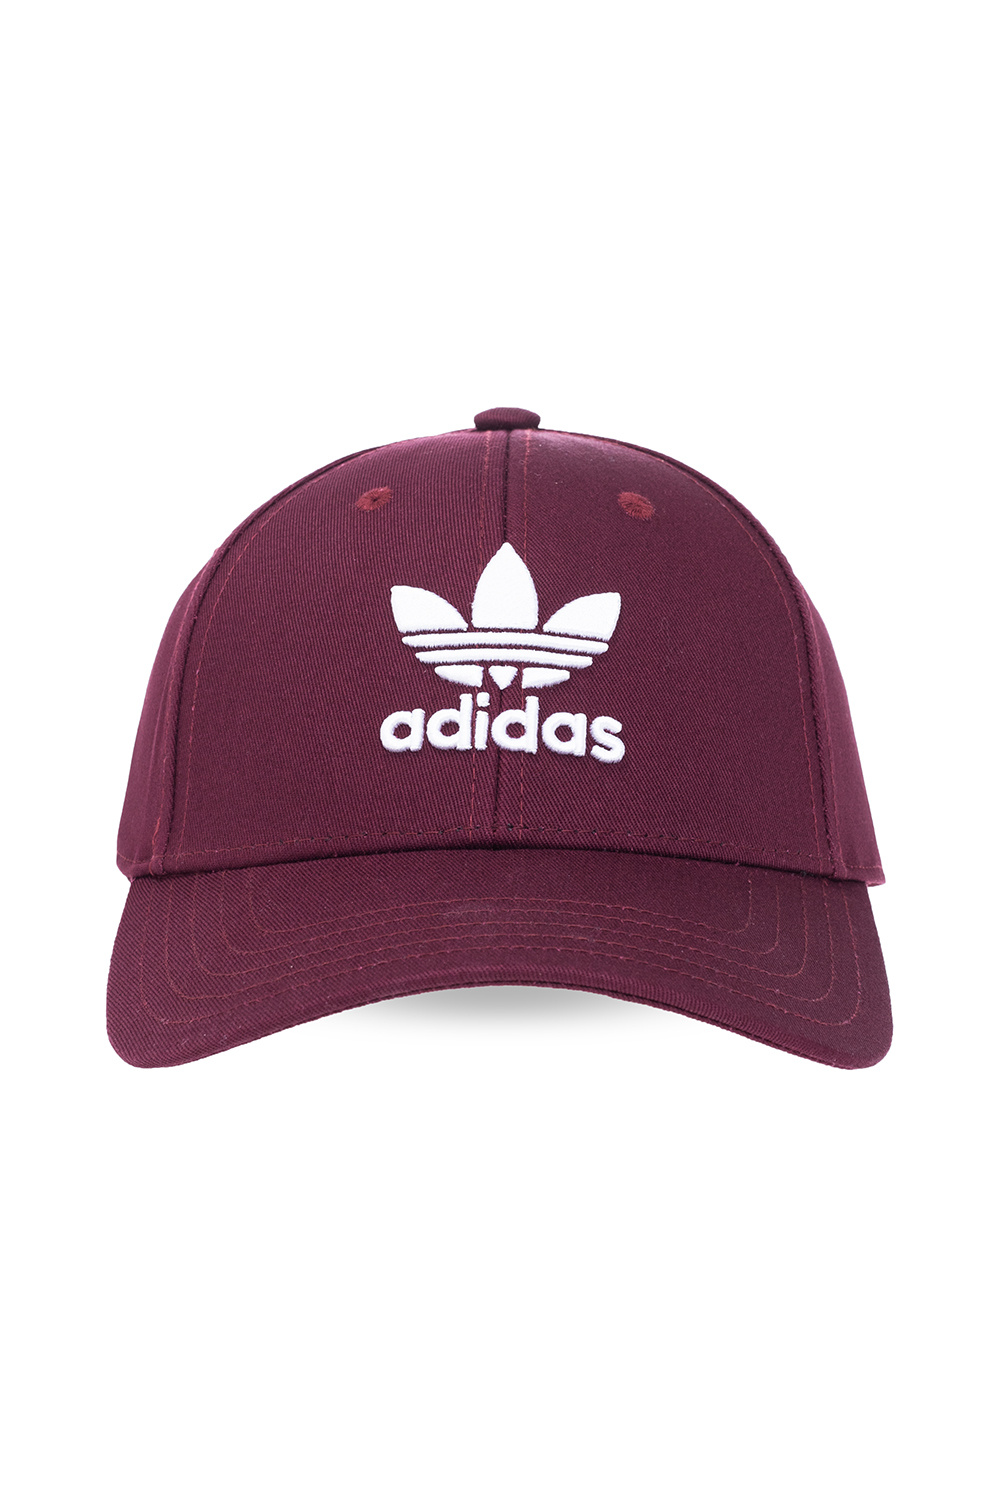 Louis vuitton - Gucci hats - clothing & accessories - by owner - apparel  sale - craigslist